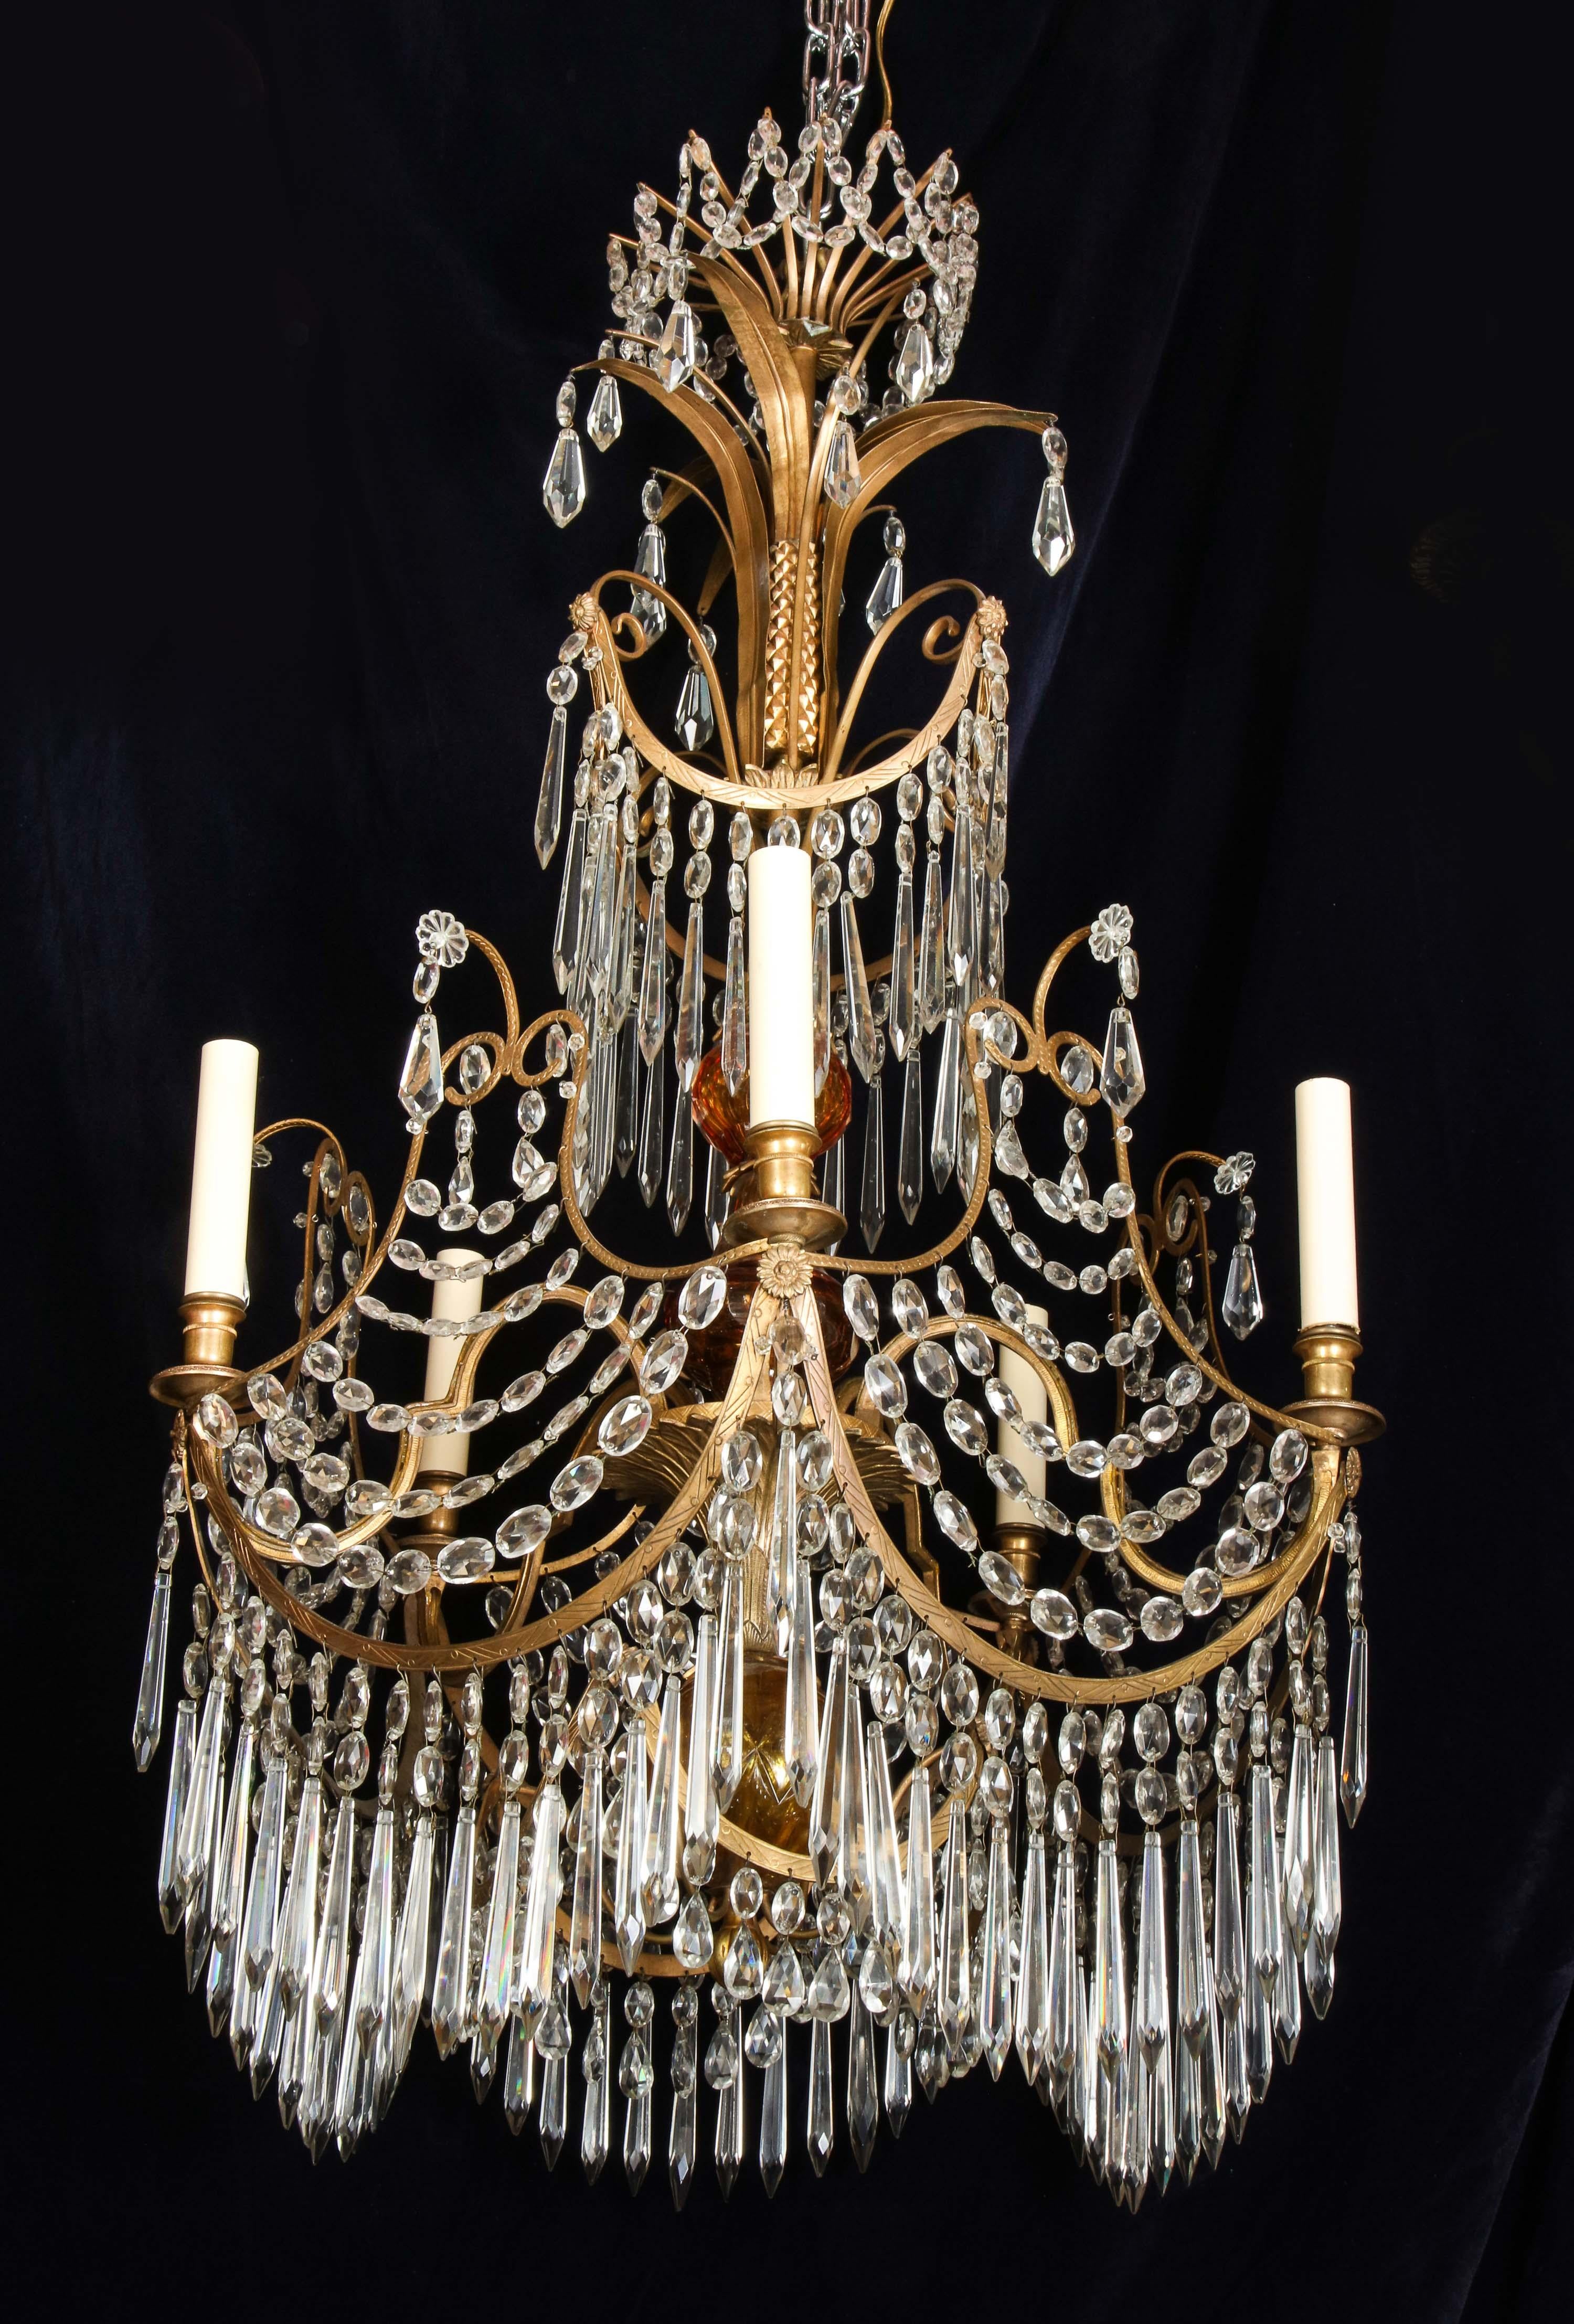 Rare Antique Russian Neoclassical Gilt Bronze and Amber Glass Chandelier For Sale 6